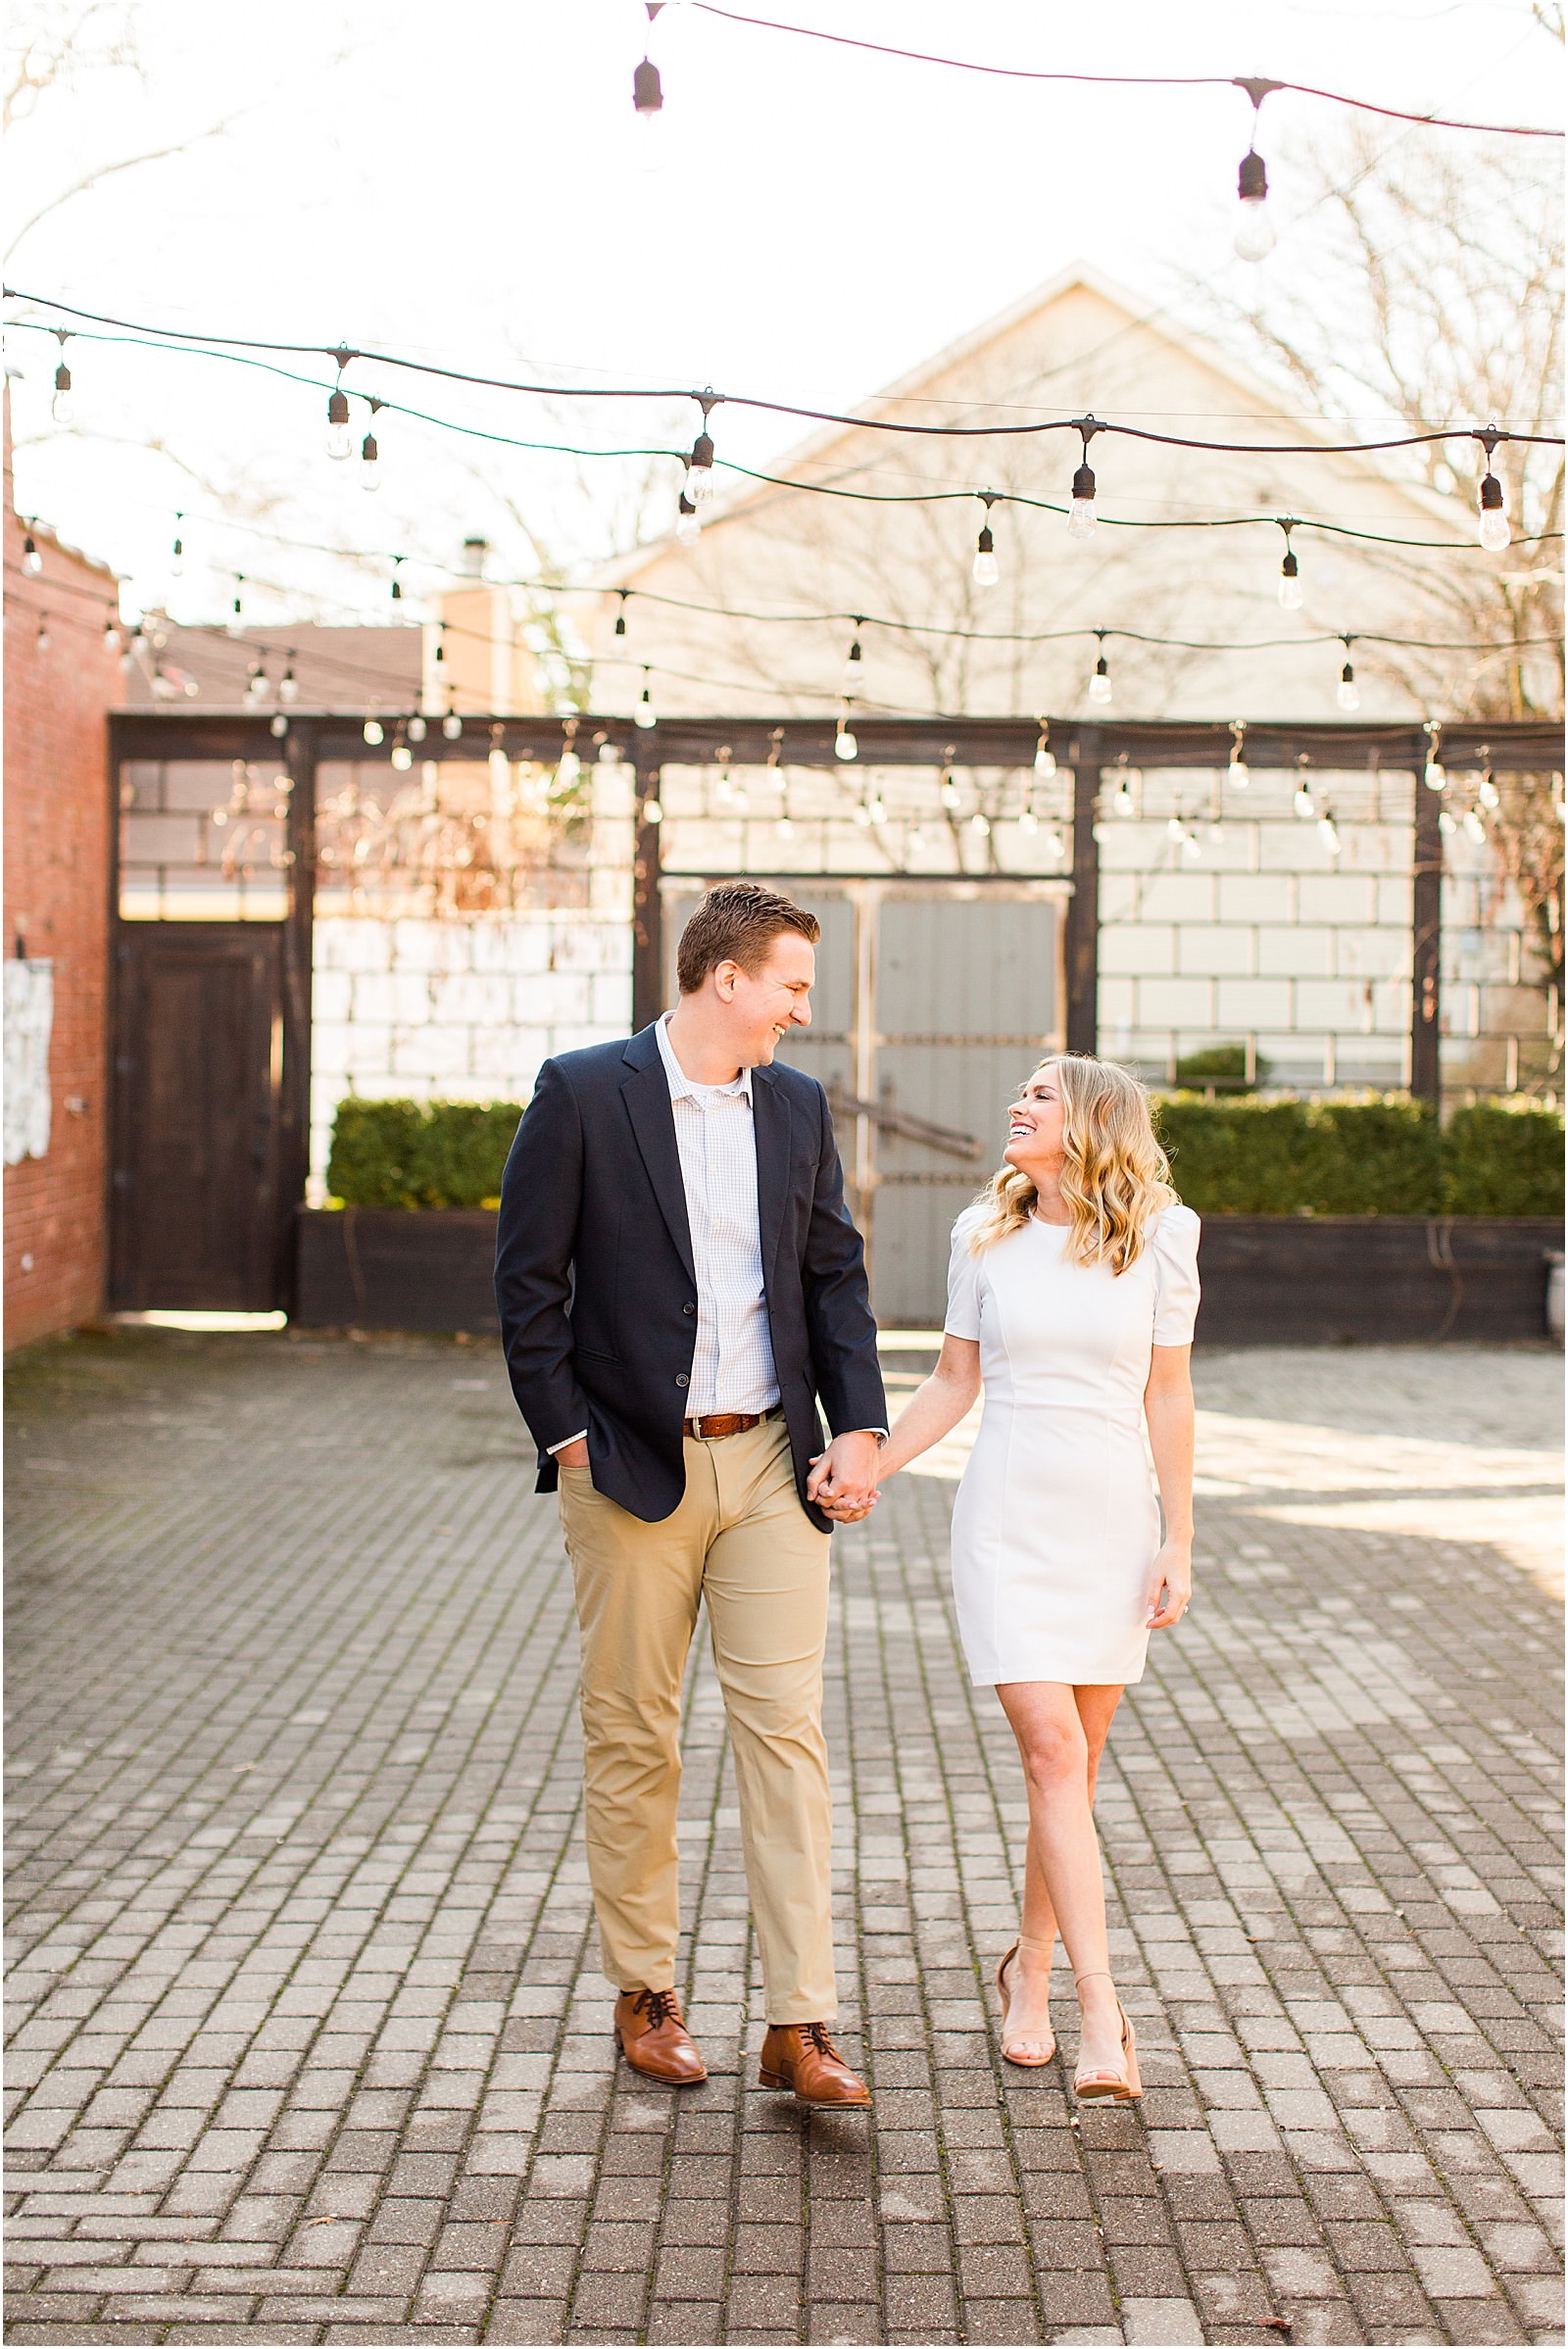 Madison and Christaan | A 20 West Engagement Session in Downto wn Newburgh | Bret and Brandie Photography009.jpg